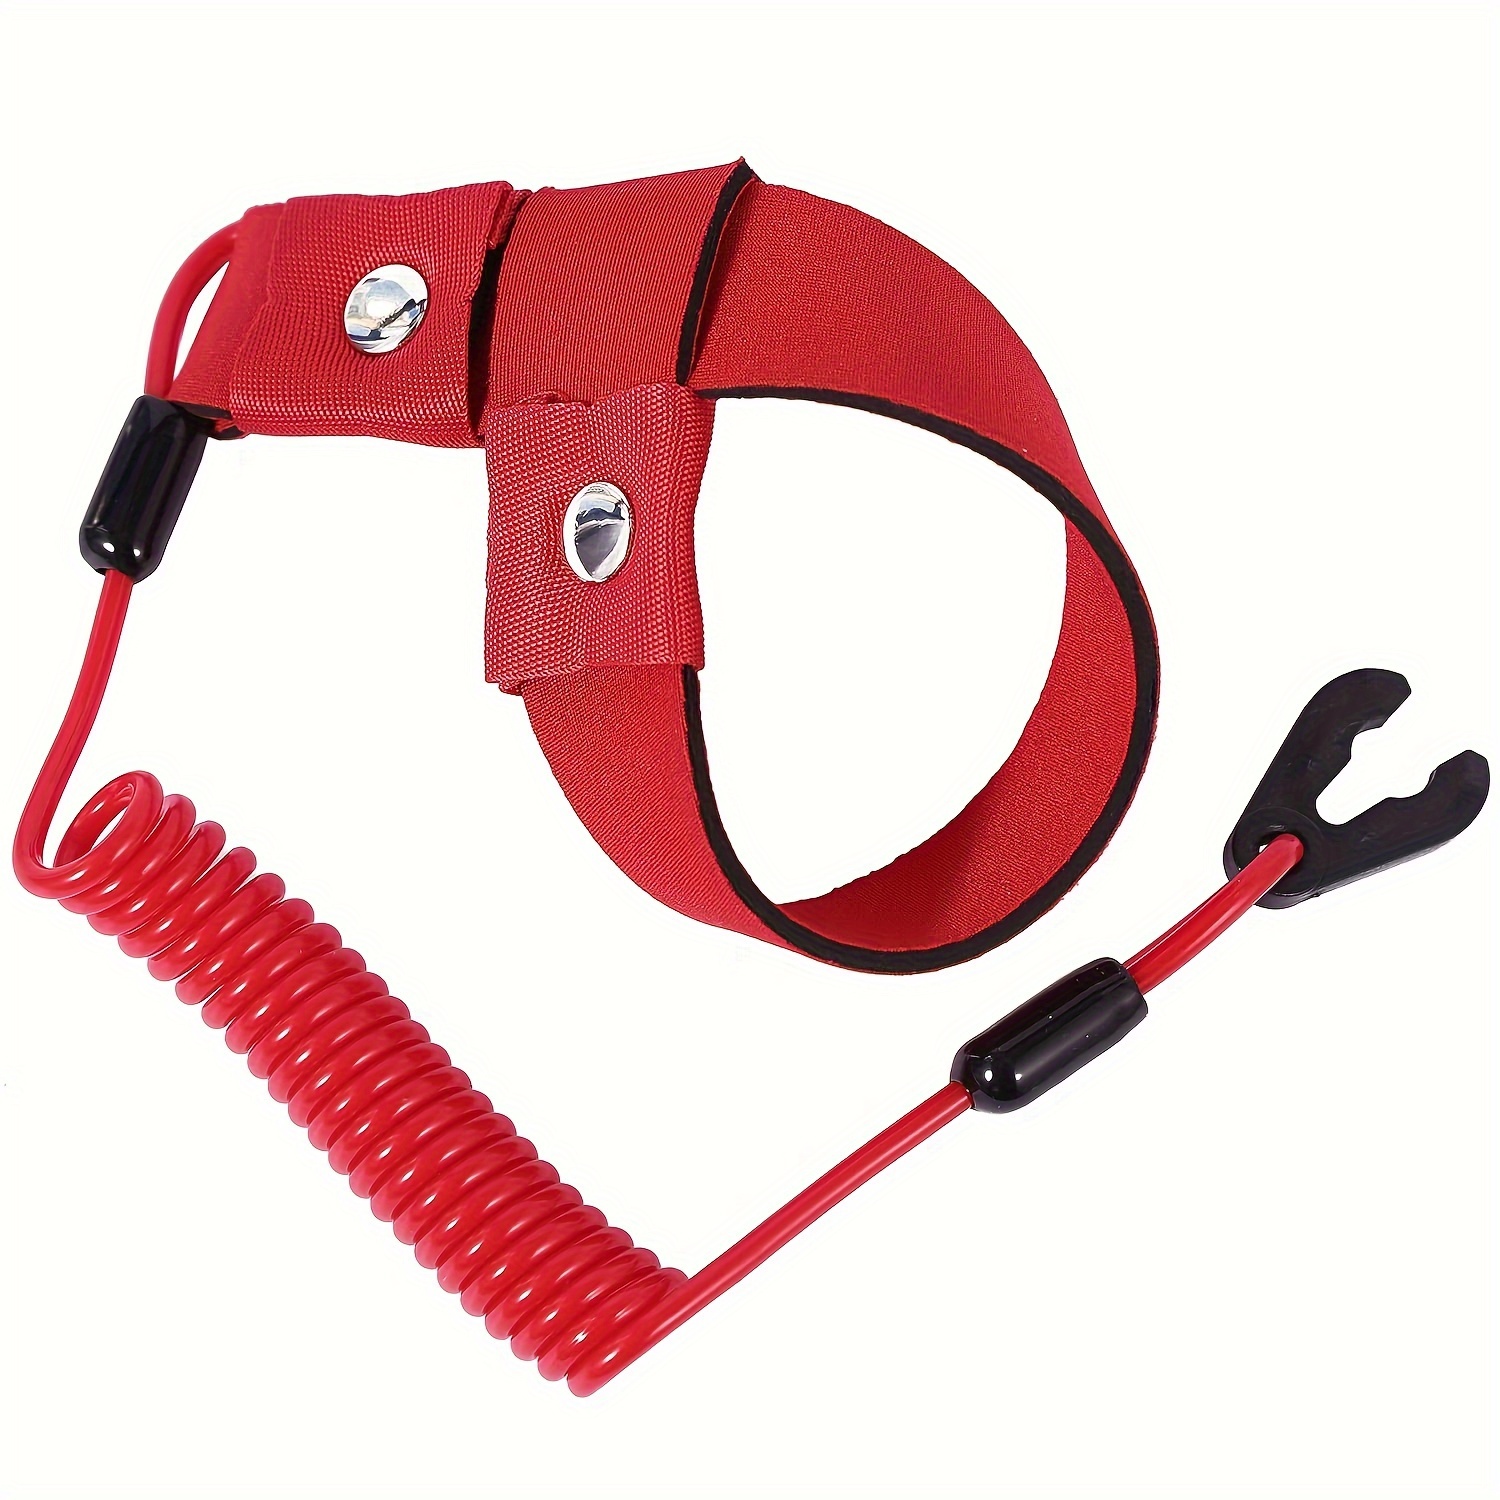 

Boat Kill Switch Lanyard Suit For Marine Outboard Motor Engine Cut Off Stop Tether Wrist Strap, Ew2-68348-00-00 Replacement (red)